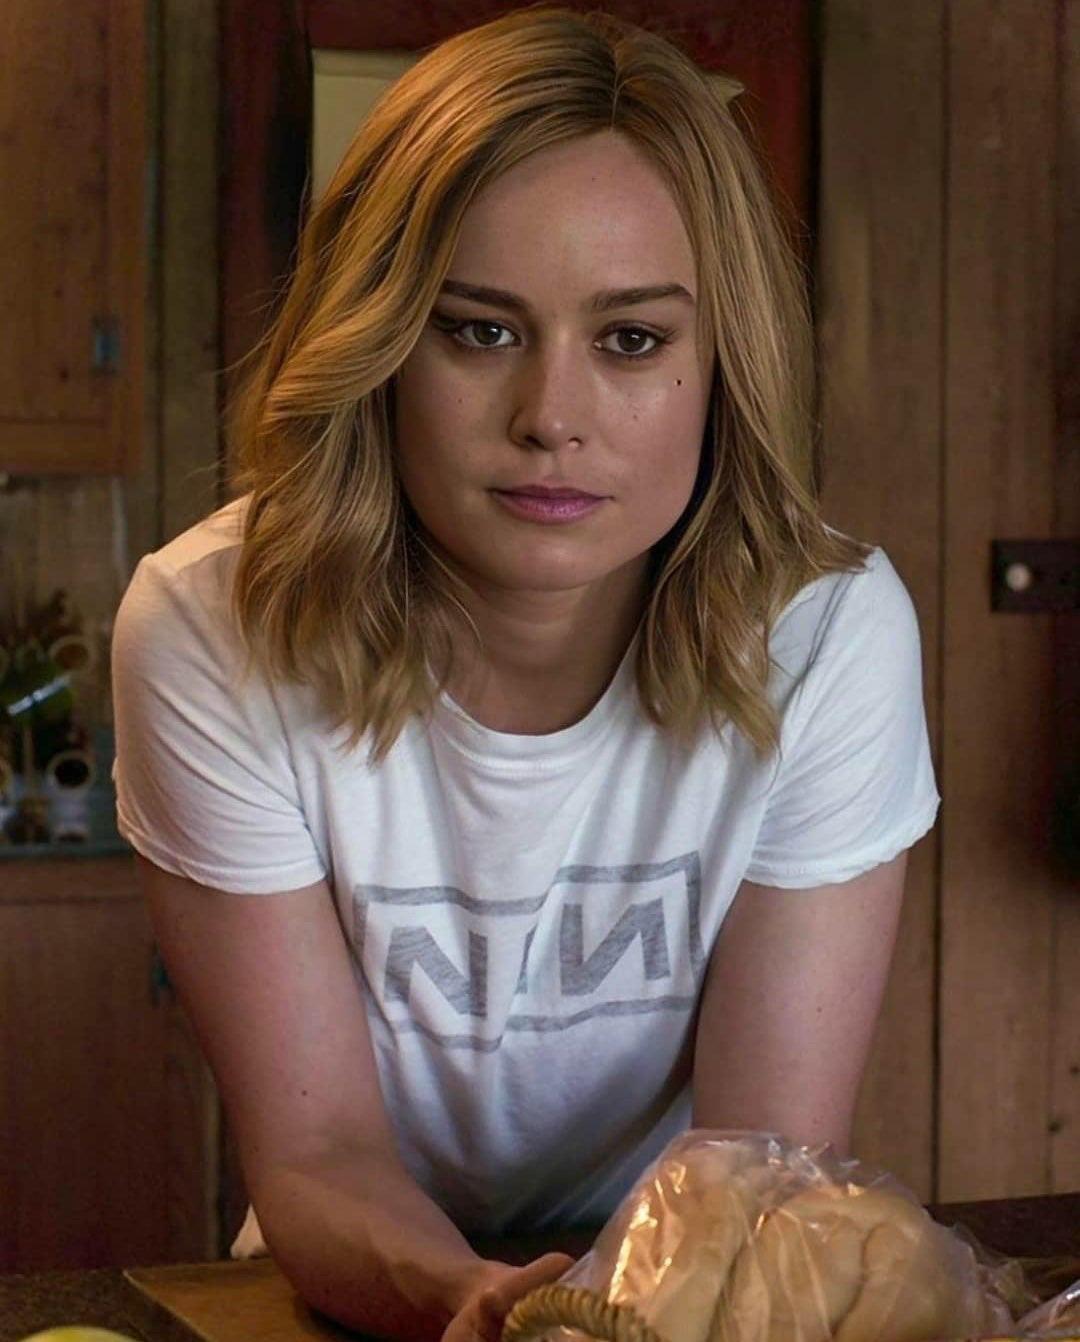 Brie Larson watching you stroke your member